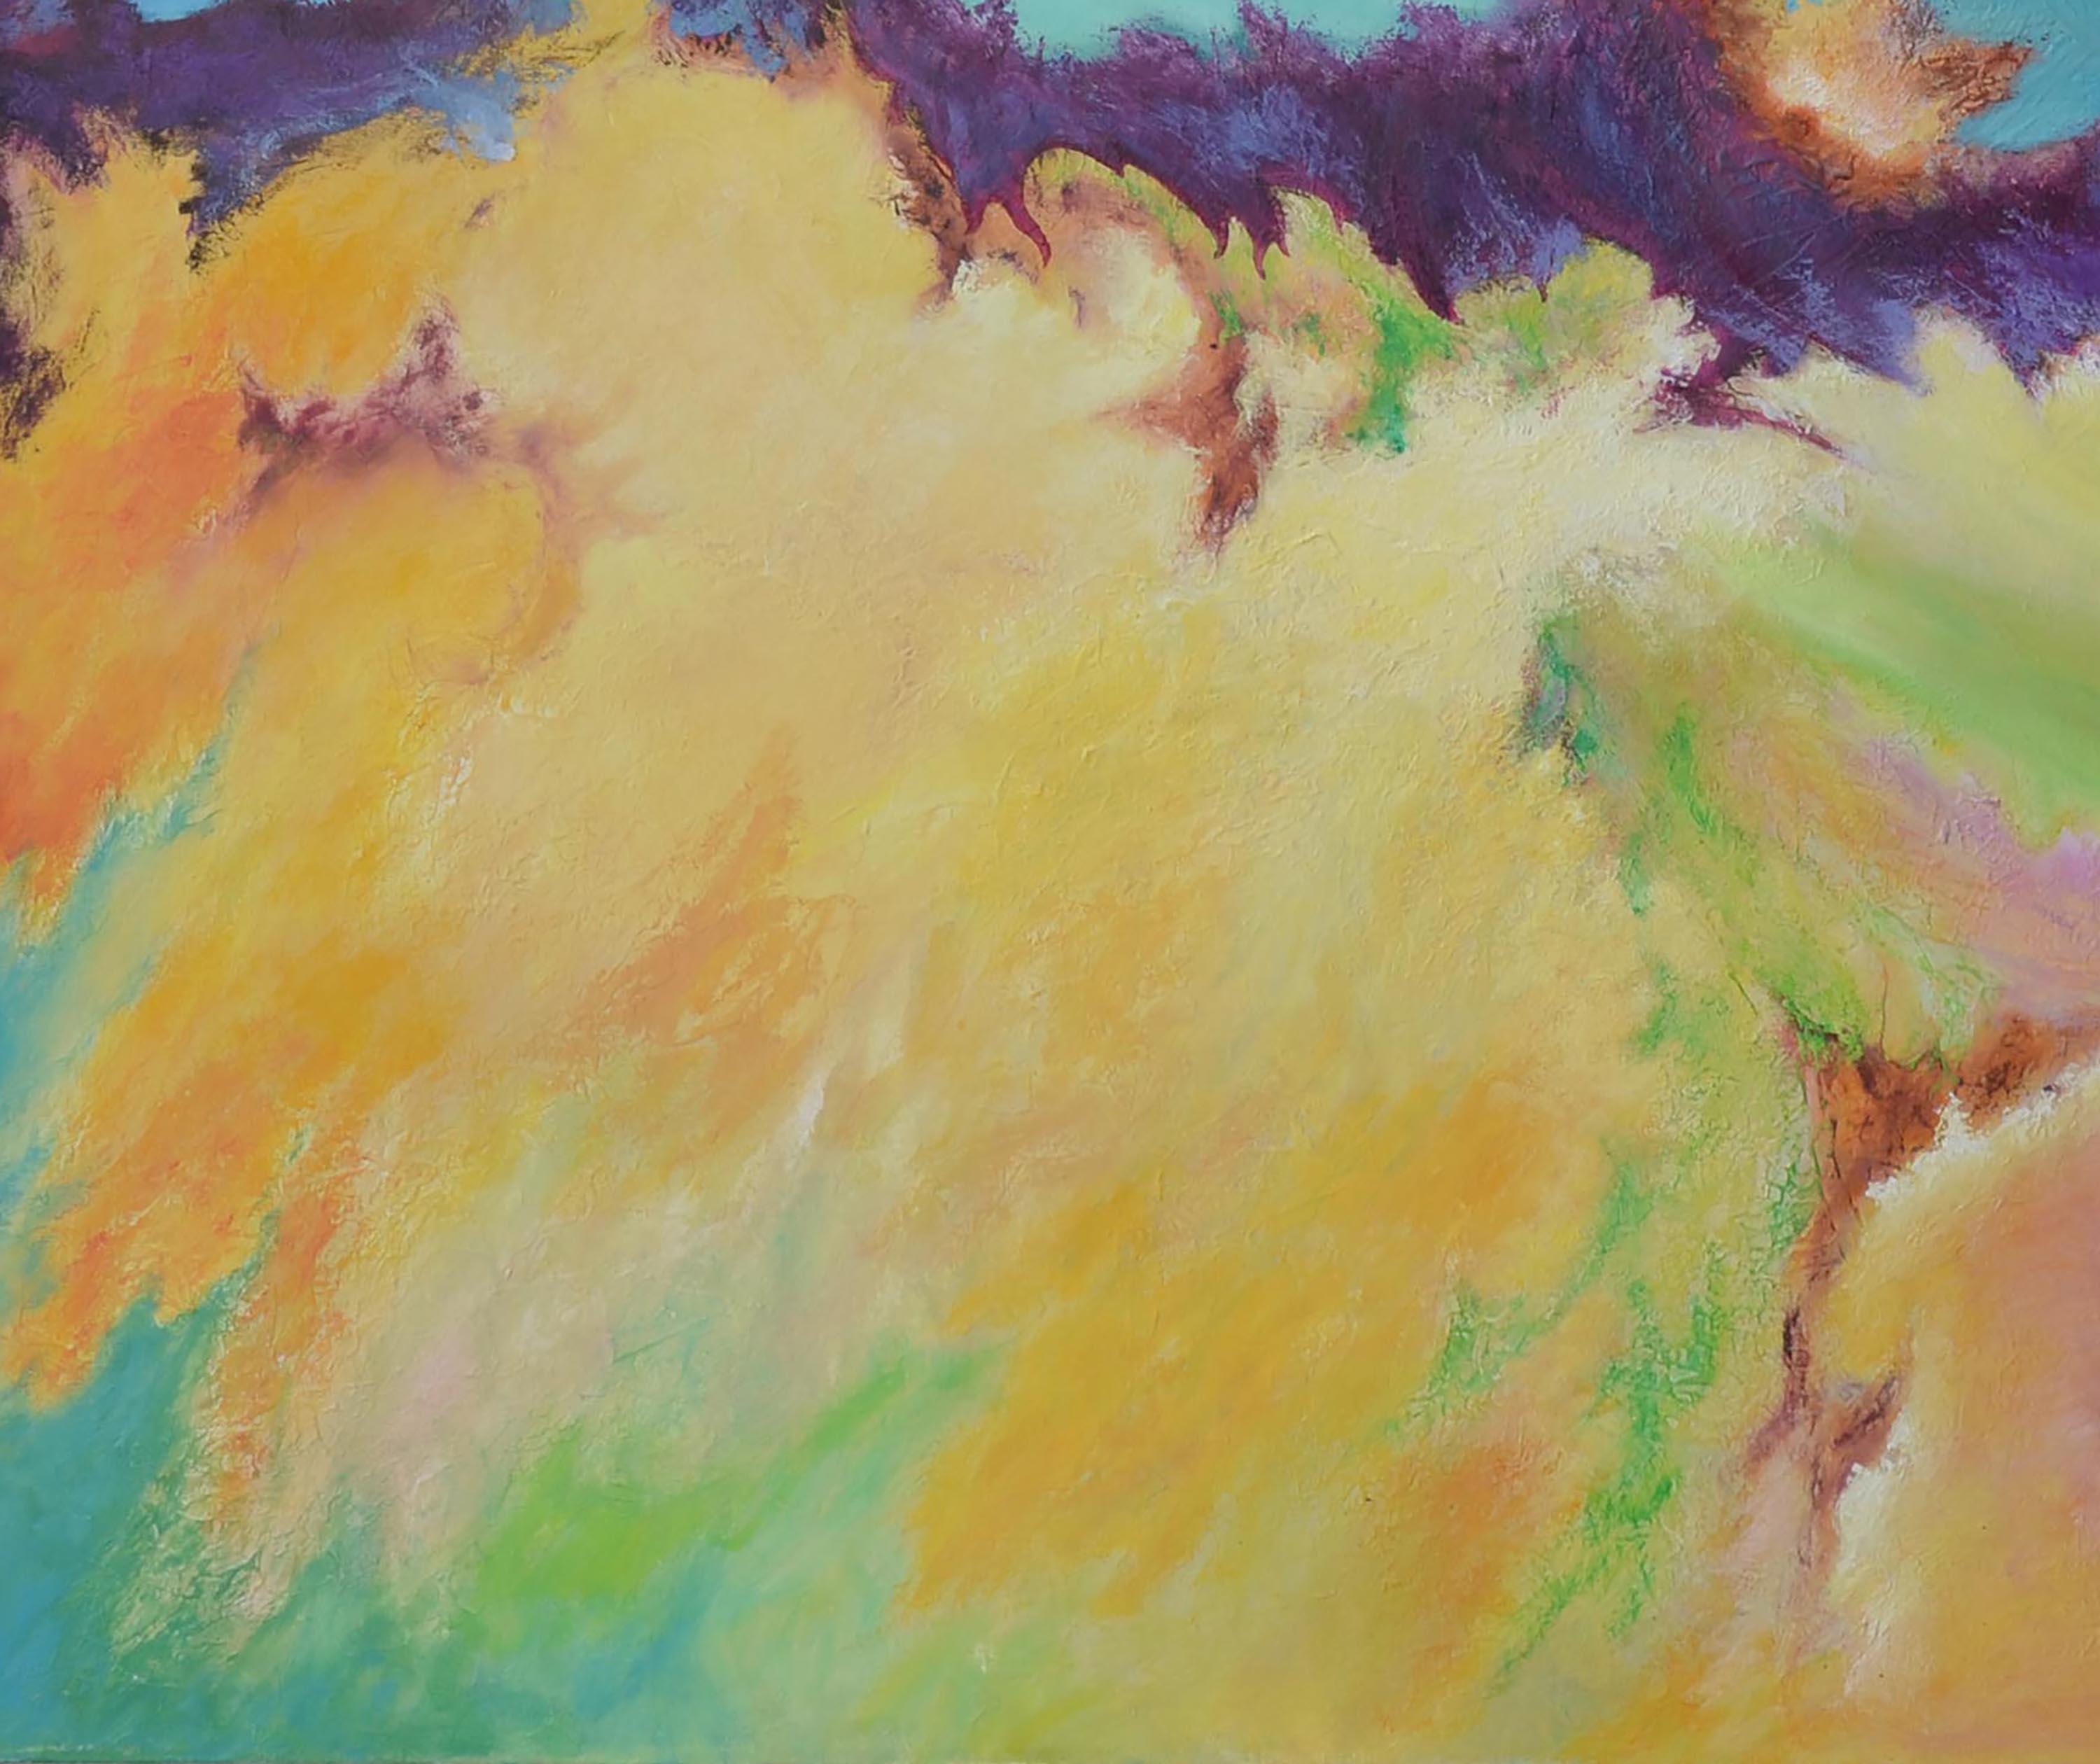 Gaia's Creativity, Contemporary Large-Scale Rainbow Abstract

Gorgeous and compelling large-scale colorful rainbow abstract by an unknown San Francisco bay area artist (American, 20th Century), c. 2000. Brilliant and bright colors in the spectrum of